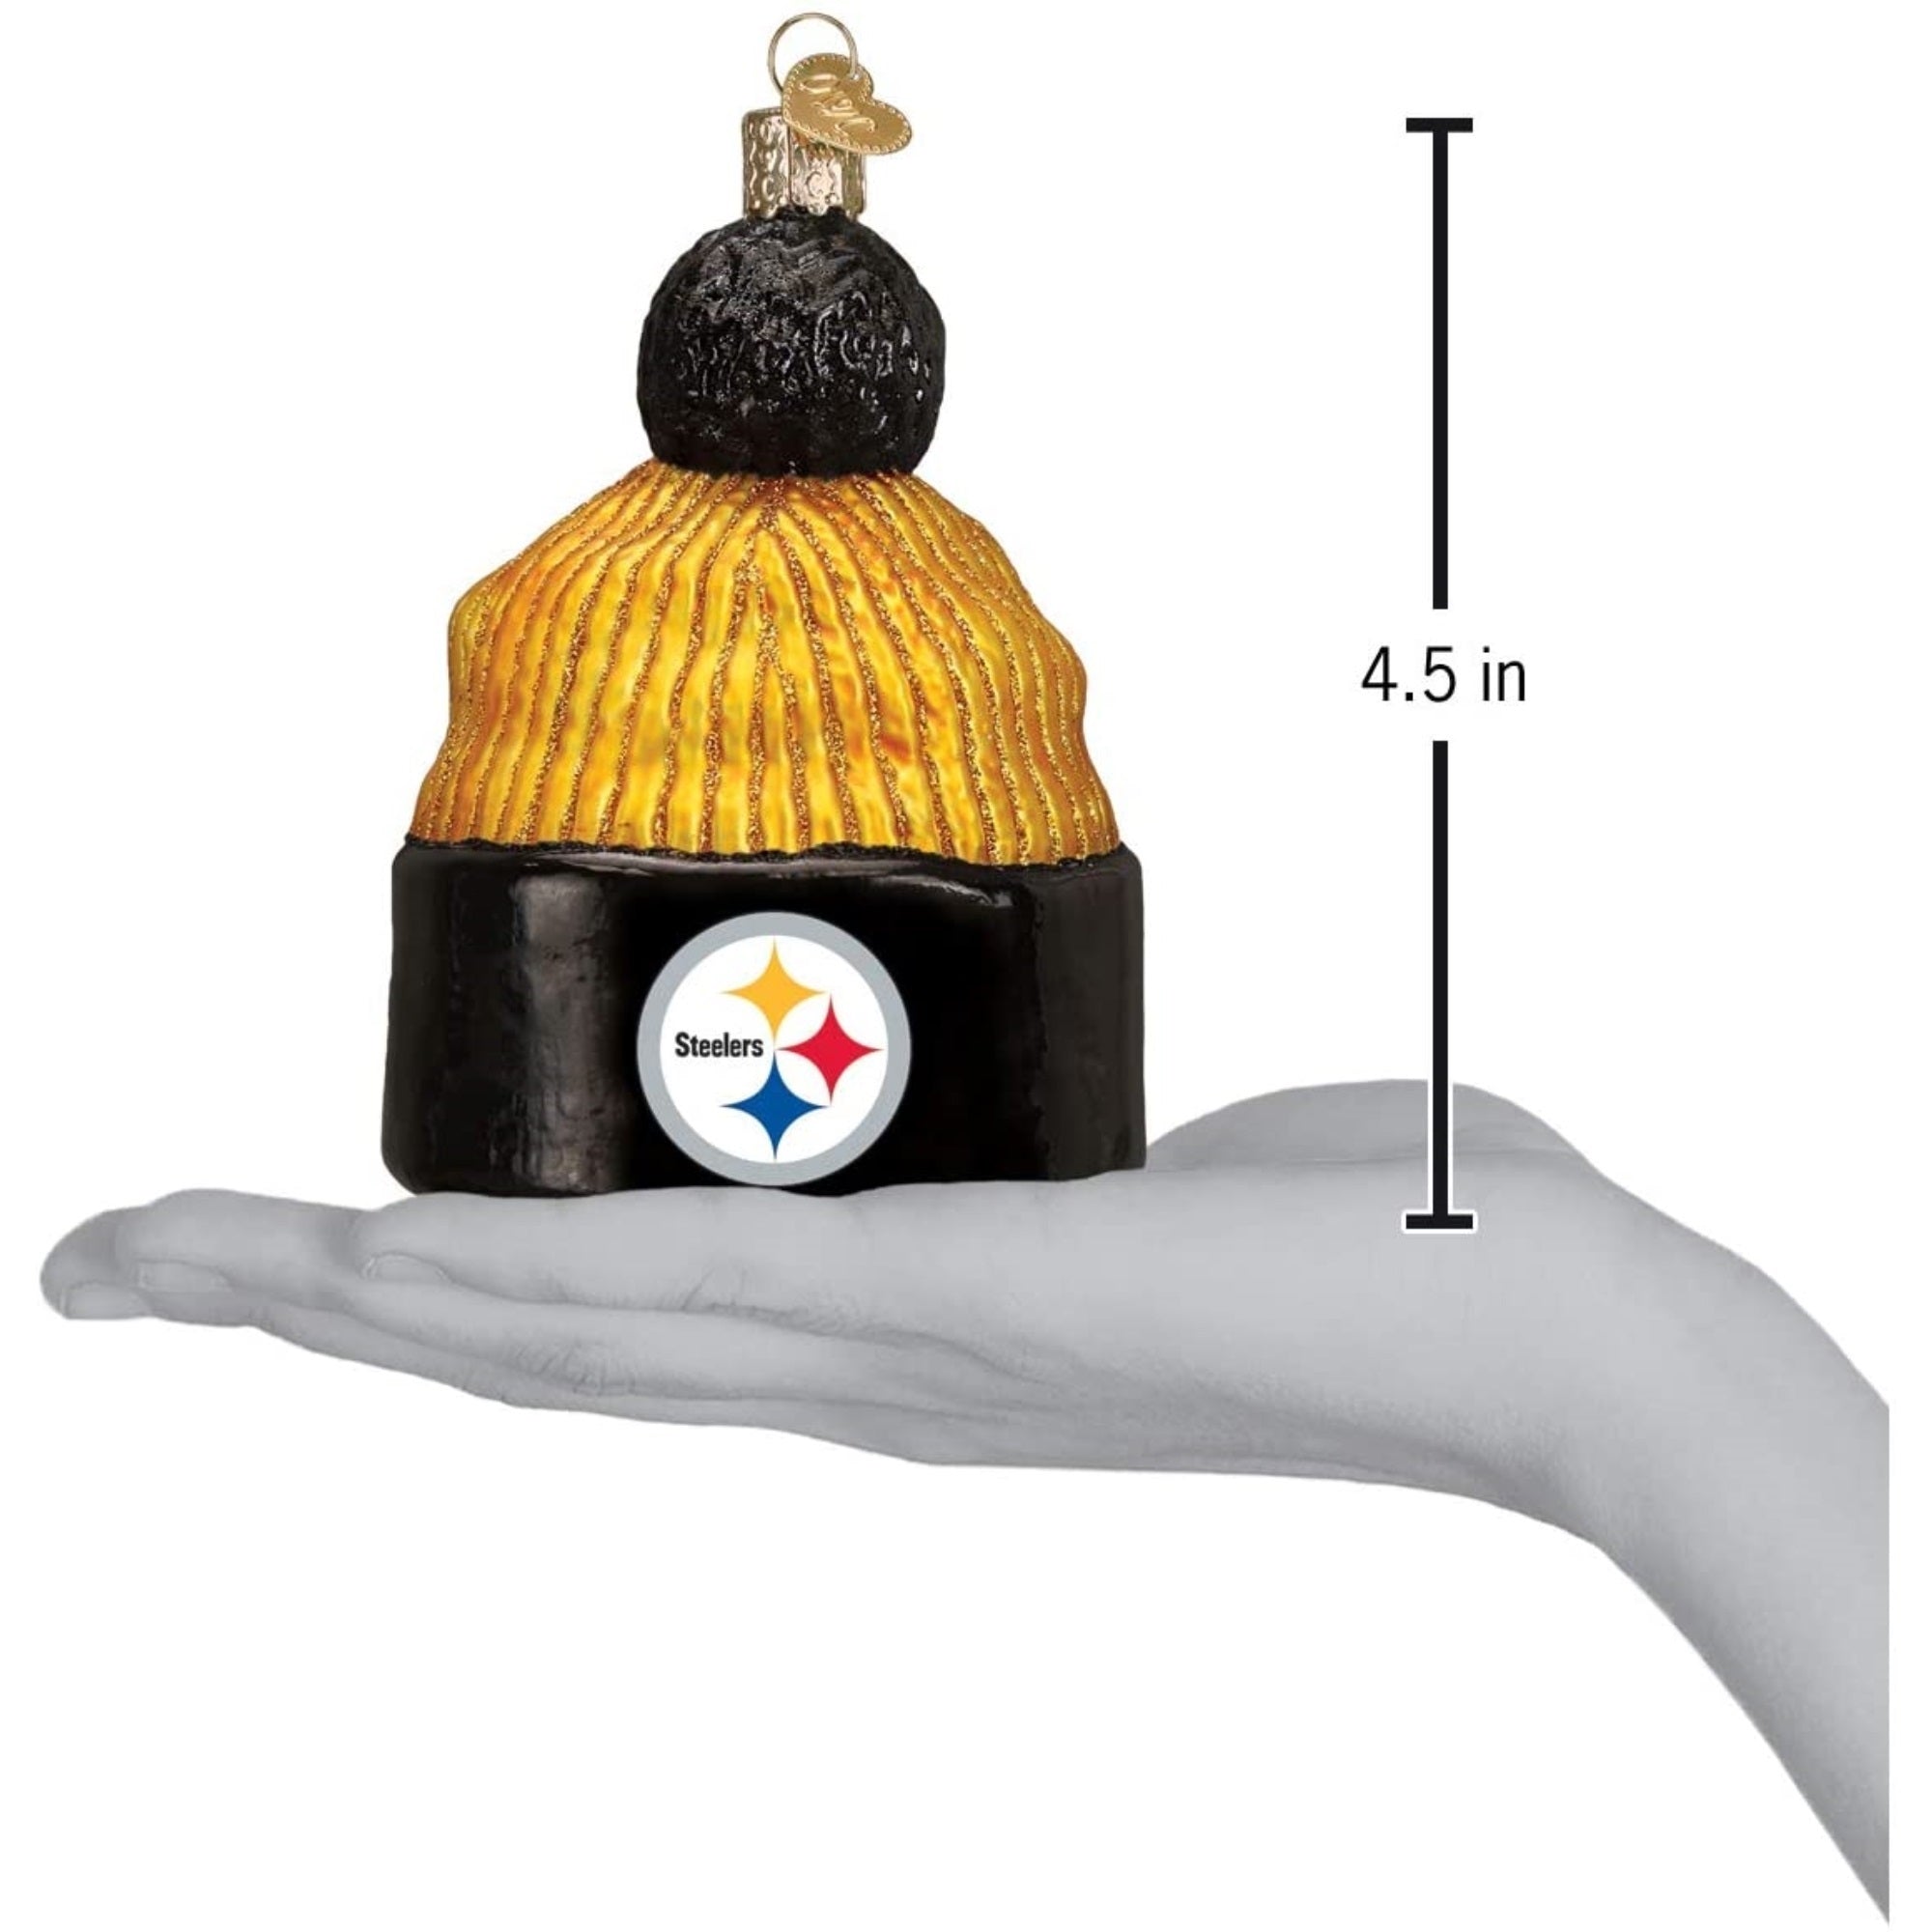 Old World Christmas Pittsburgh Steelers Beanie Ornament For Christmas Tree